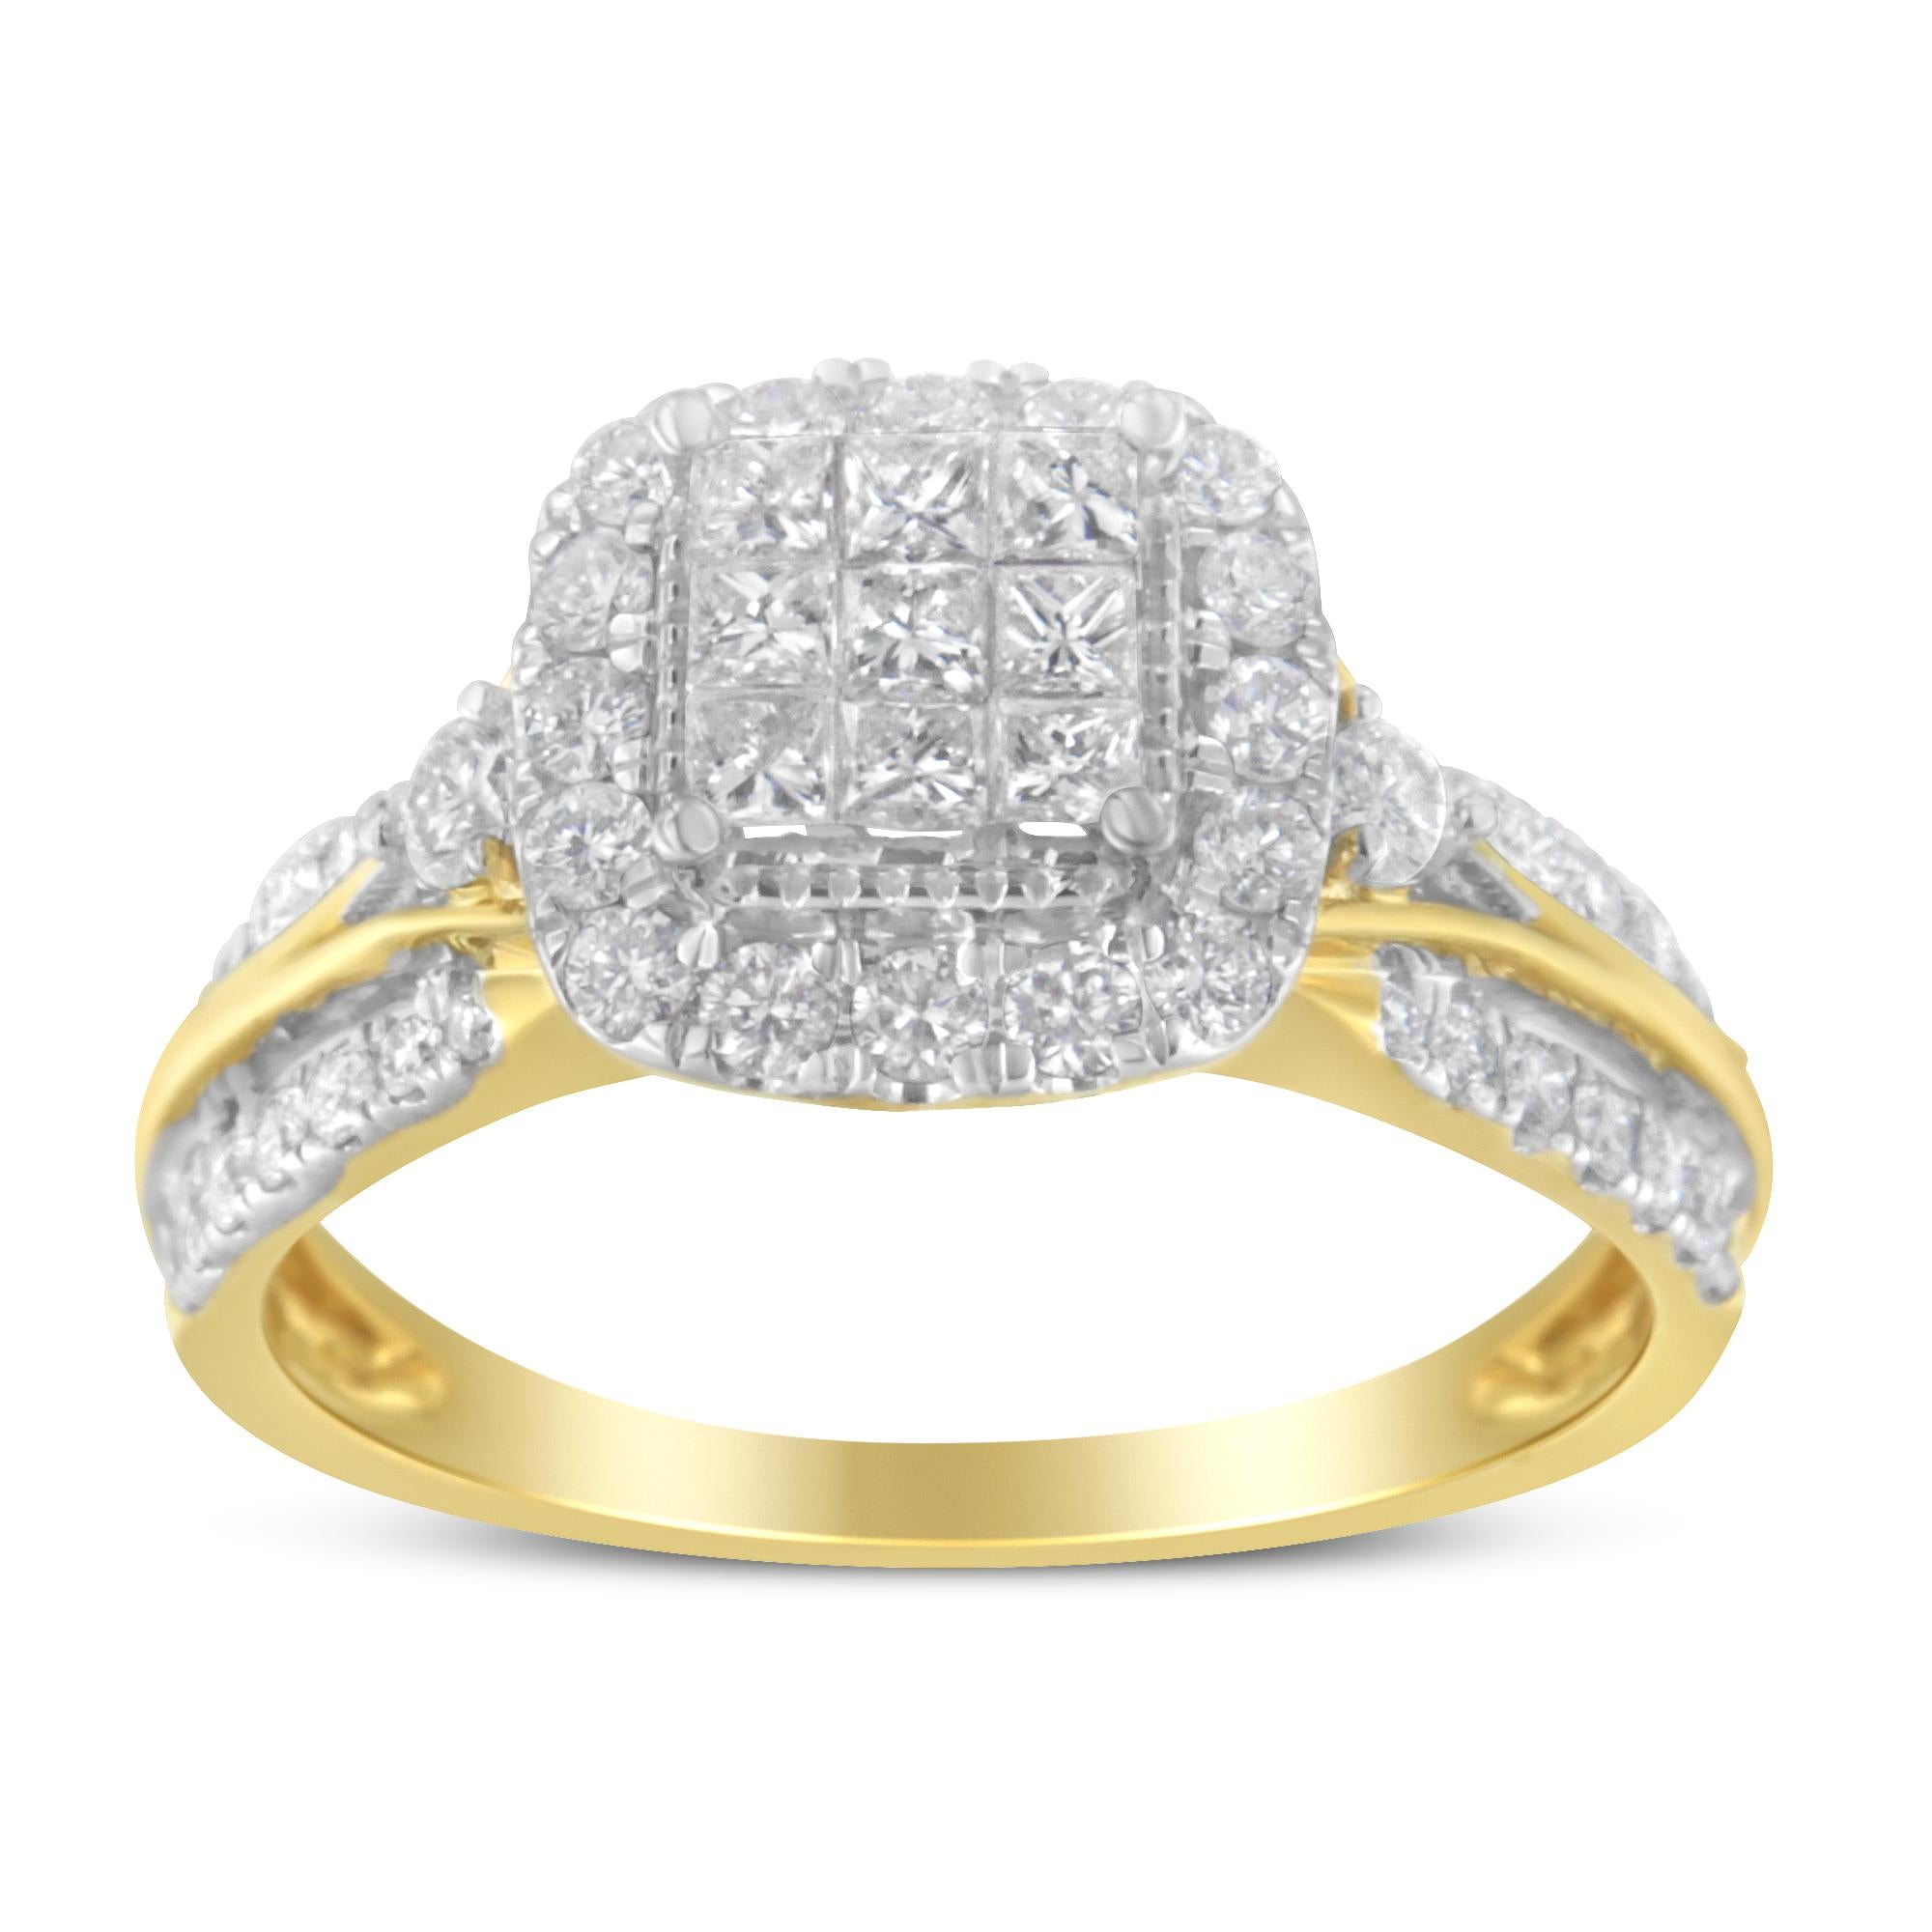 For Sale:  10K Yellow Gold 1.0 Carat Diamond Cluster Halo Triple-Band-Look Engagement Ring  3